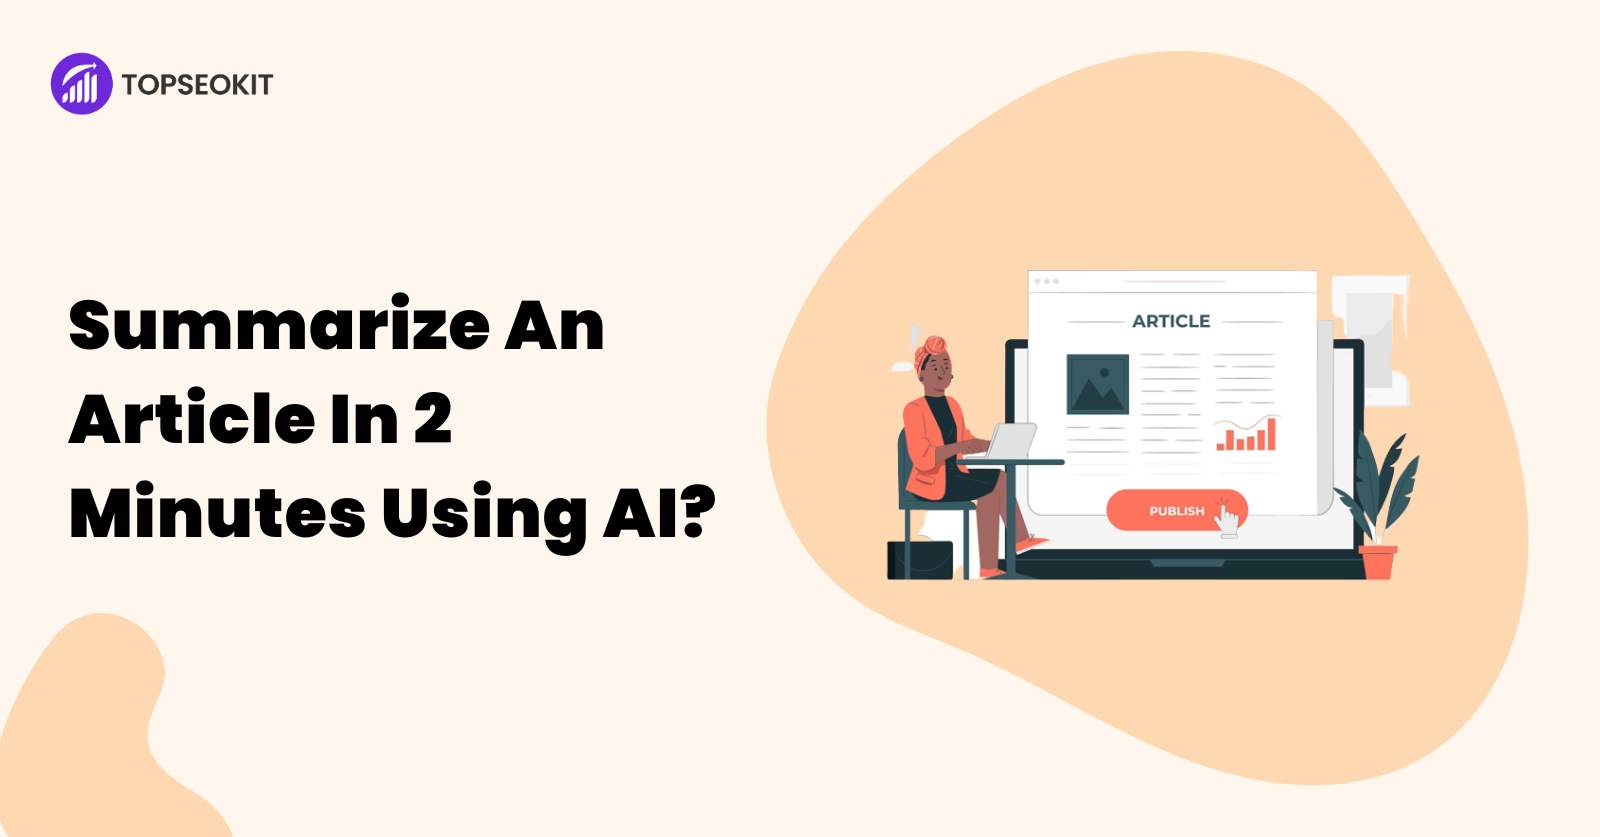 How to summarize article in 2 minutes using AI?